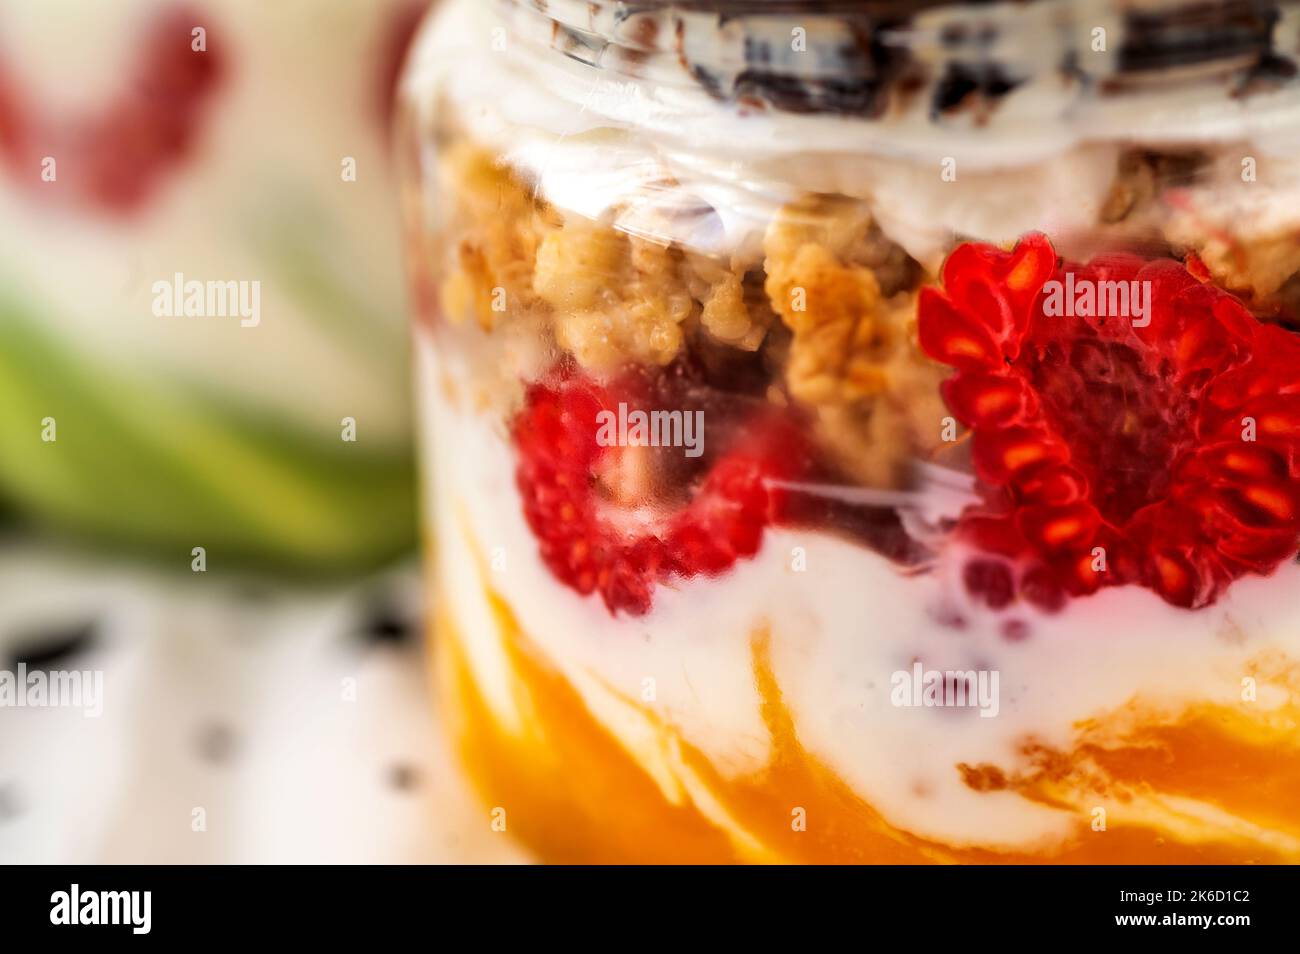 Detailed view to colorful jar with raspberry, granola, nut, joghurt, mango cream and chocolate, blurred second jar with pistachio cream. Stock Photo